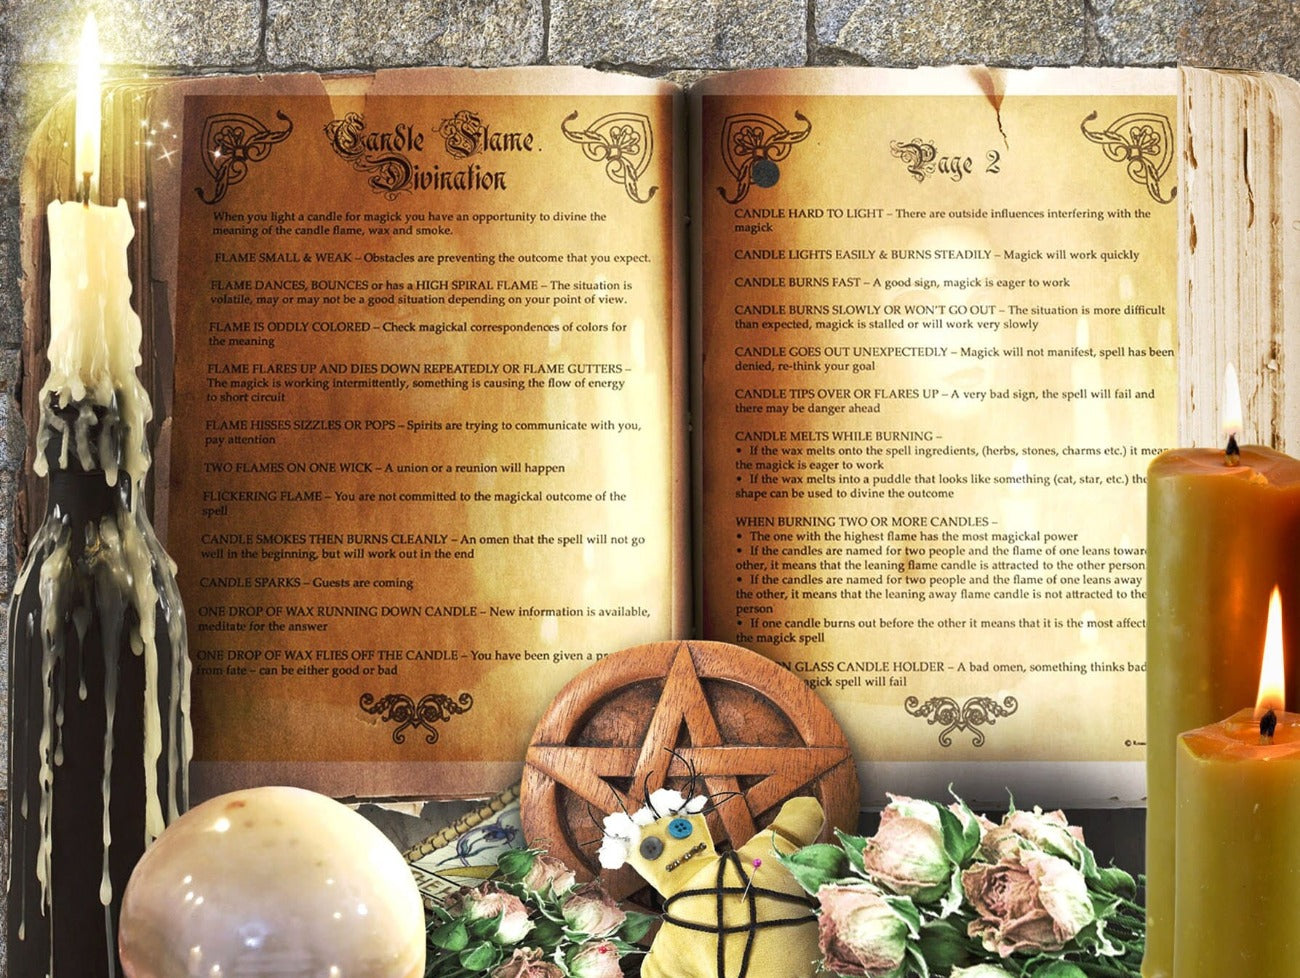 CANDLE FLAME DIVINATION 2 Pages, shown placed in an ancient witchcraft grimoire - Morgana Magick Spell